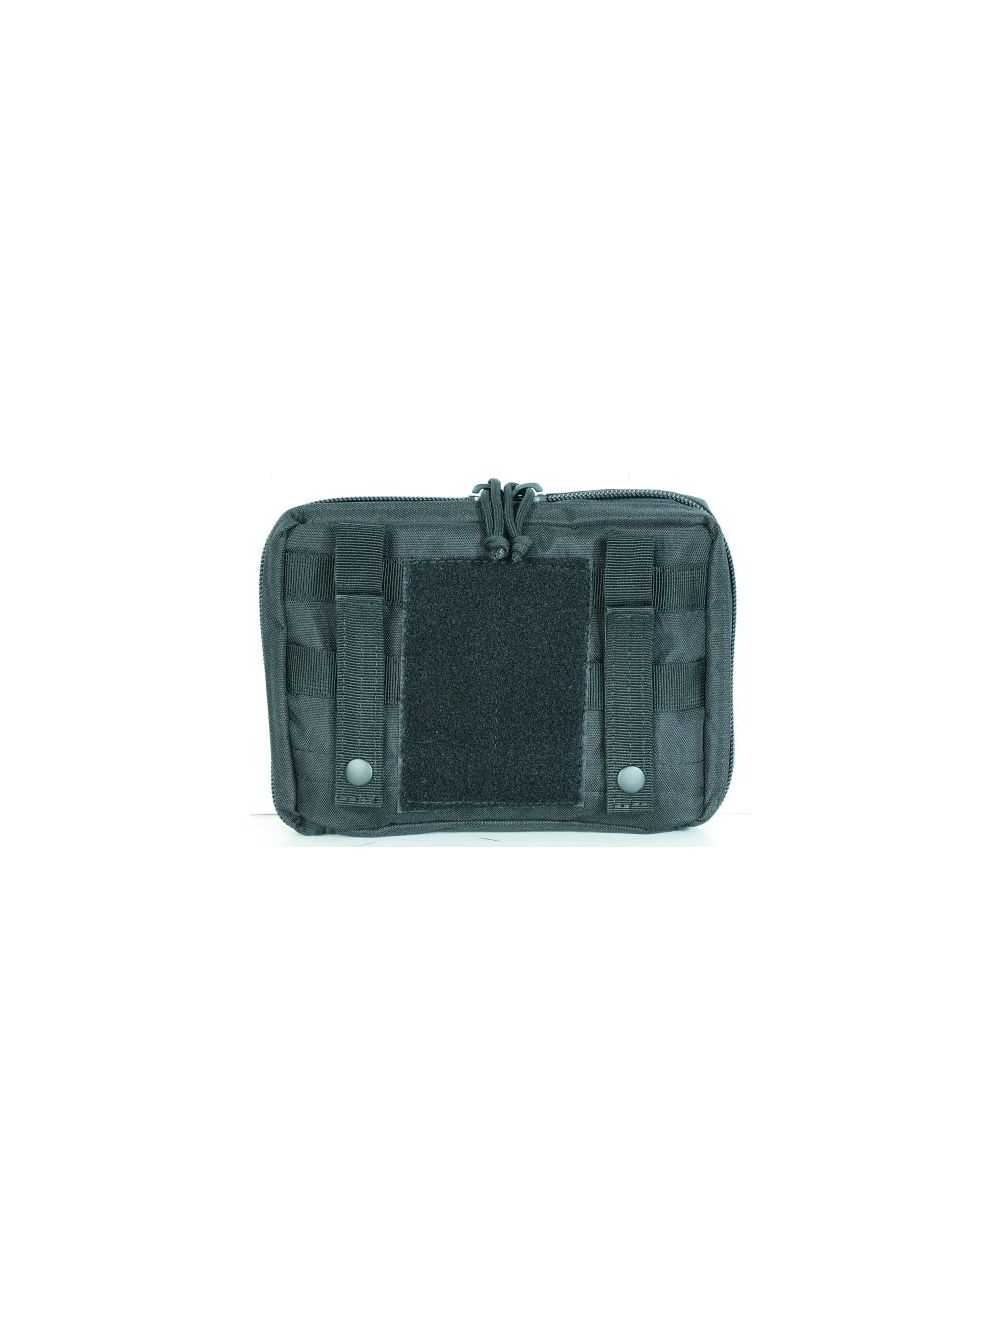 Molle Compatible Snipers Data Book Cover/Pouch